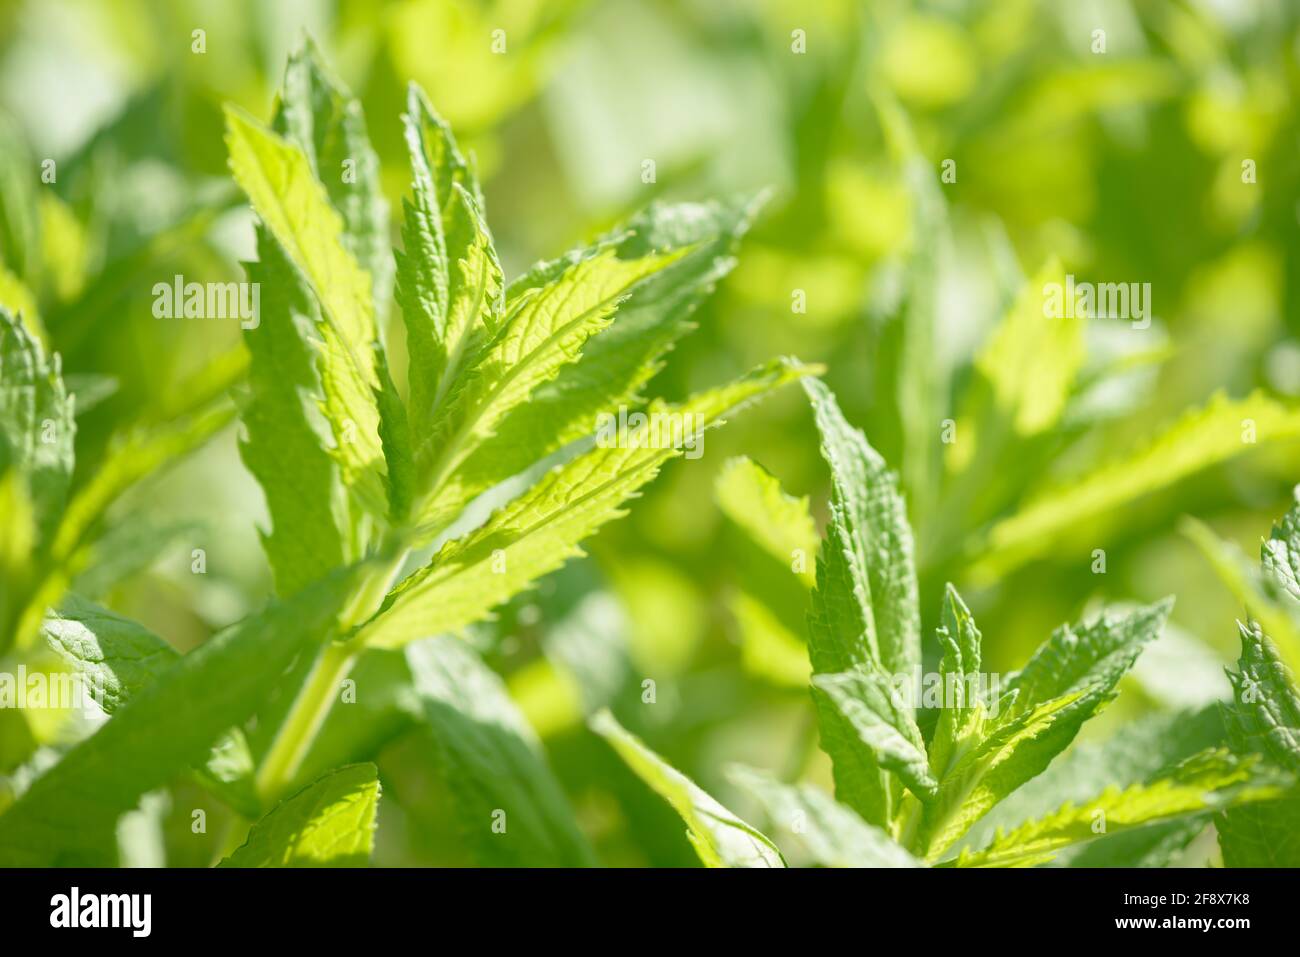 Fresh green organic mint growing in the garden. Plant used as an natural ingredient for food and drink. Raw peppermint leaves. Spearmint leaf. Stock Photo